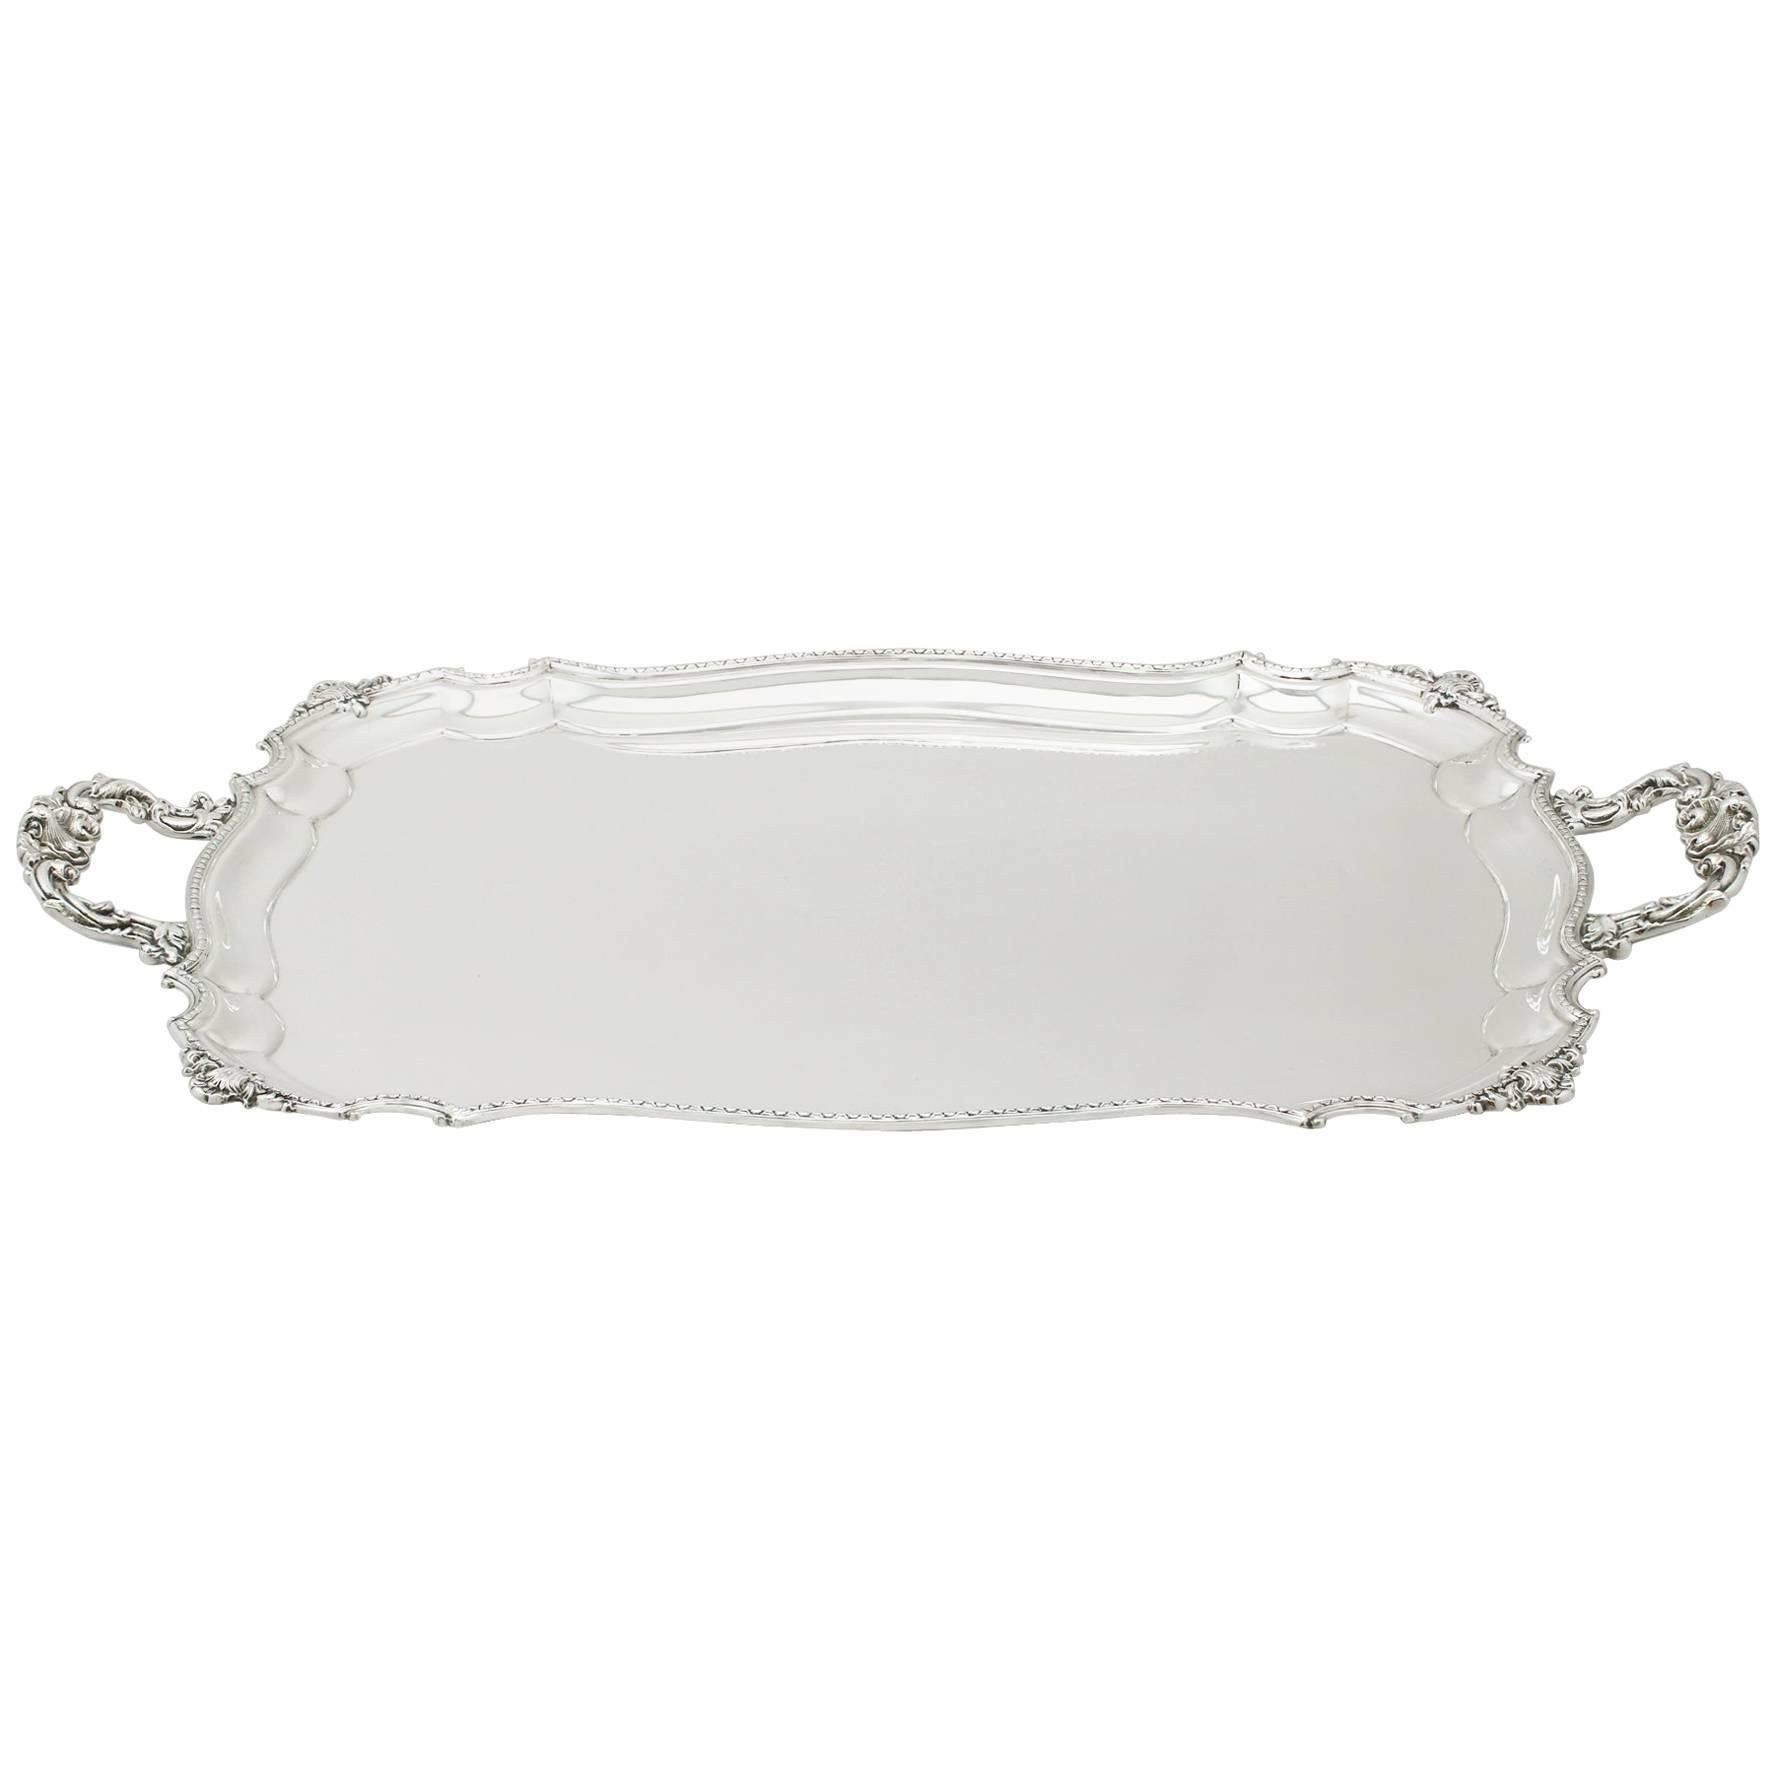 1930s Antique Sterling Silver Drinks Tray